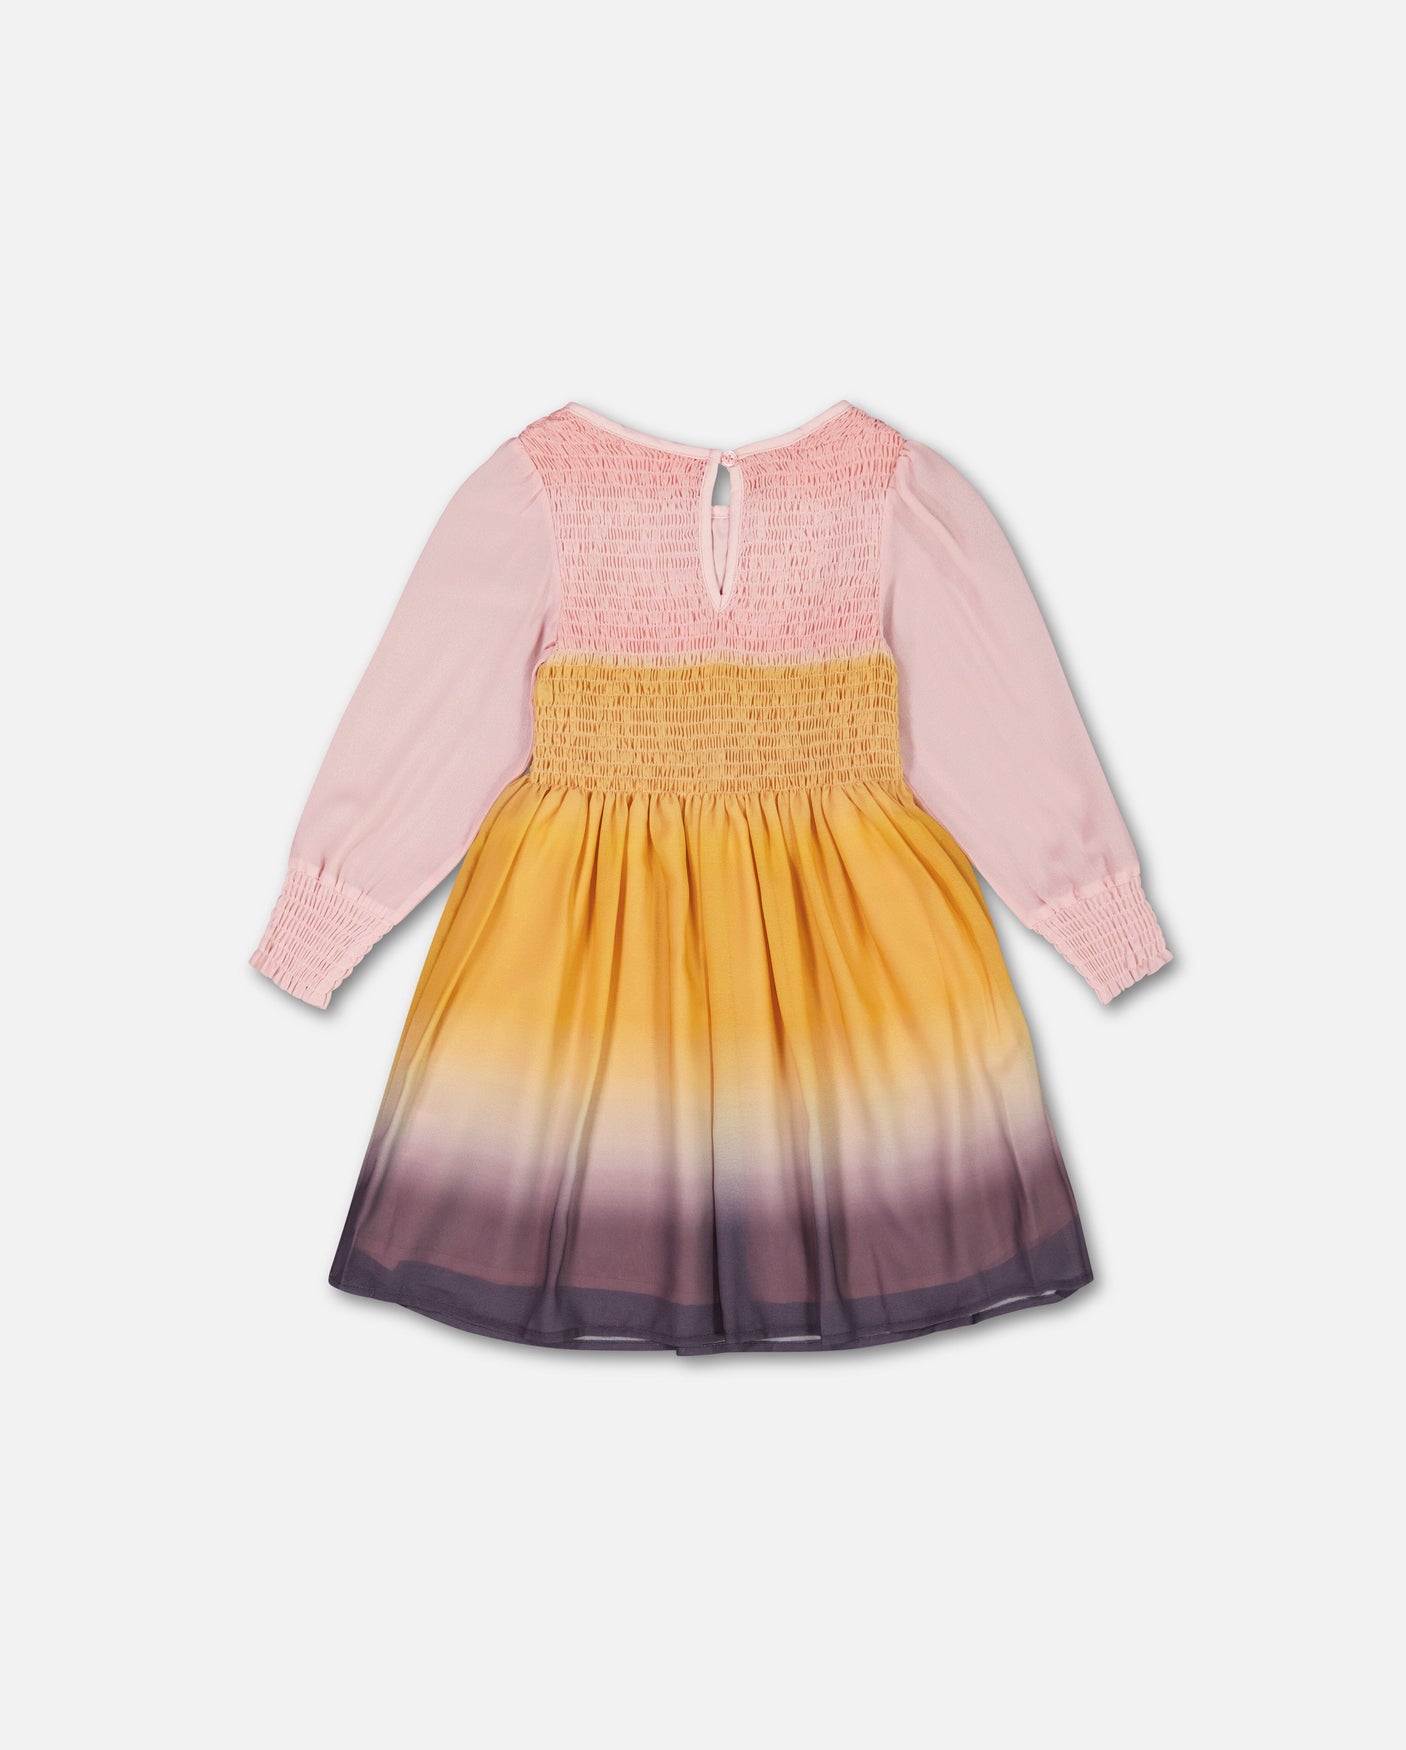 Gradient Chiffon Dress With Smocking Pink And Gold-1